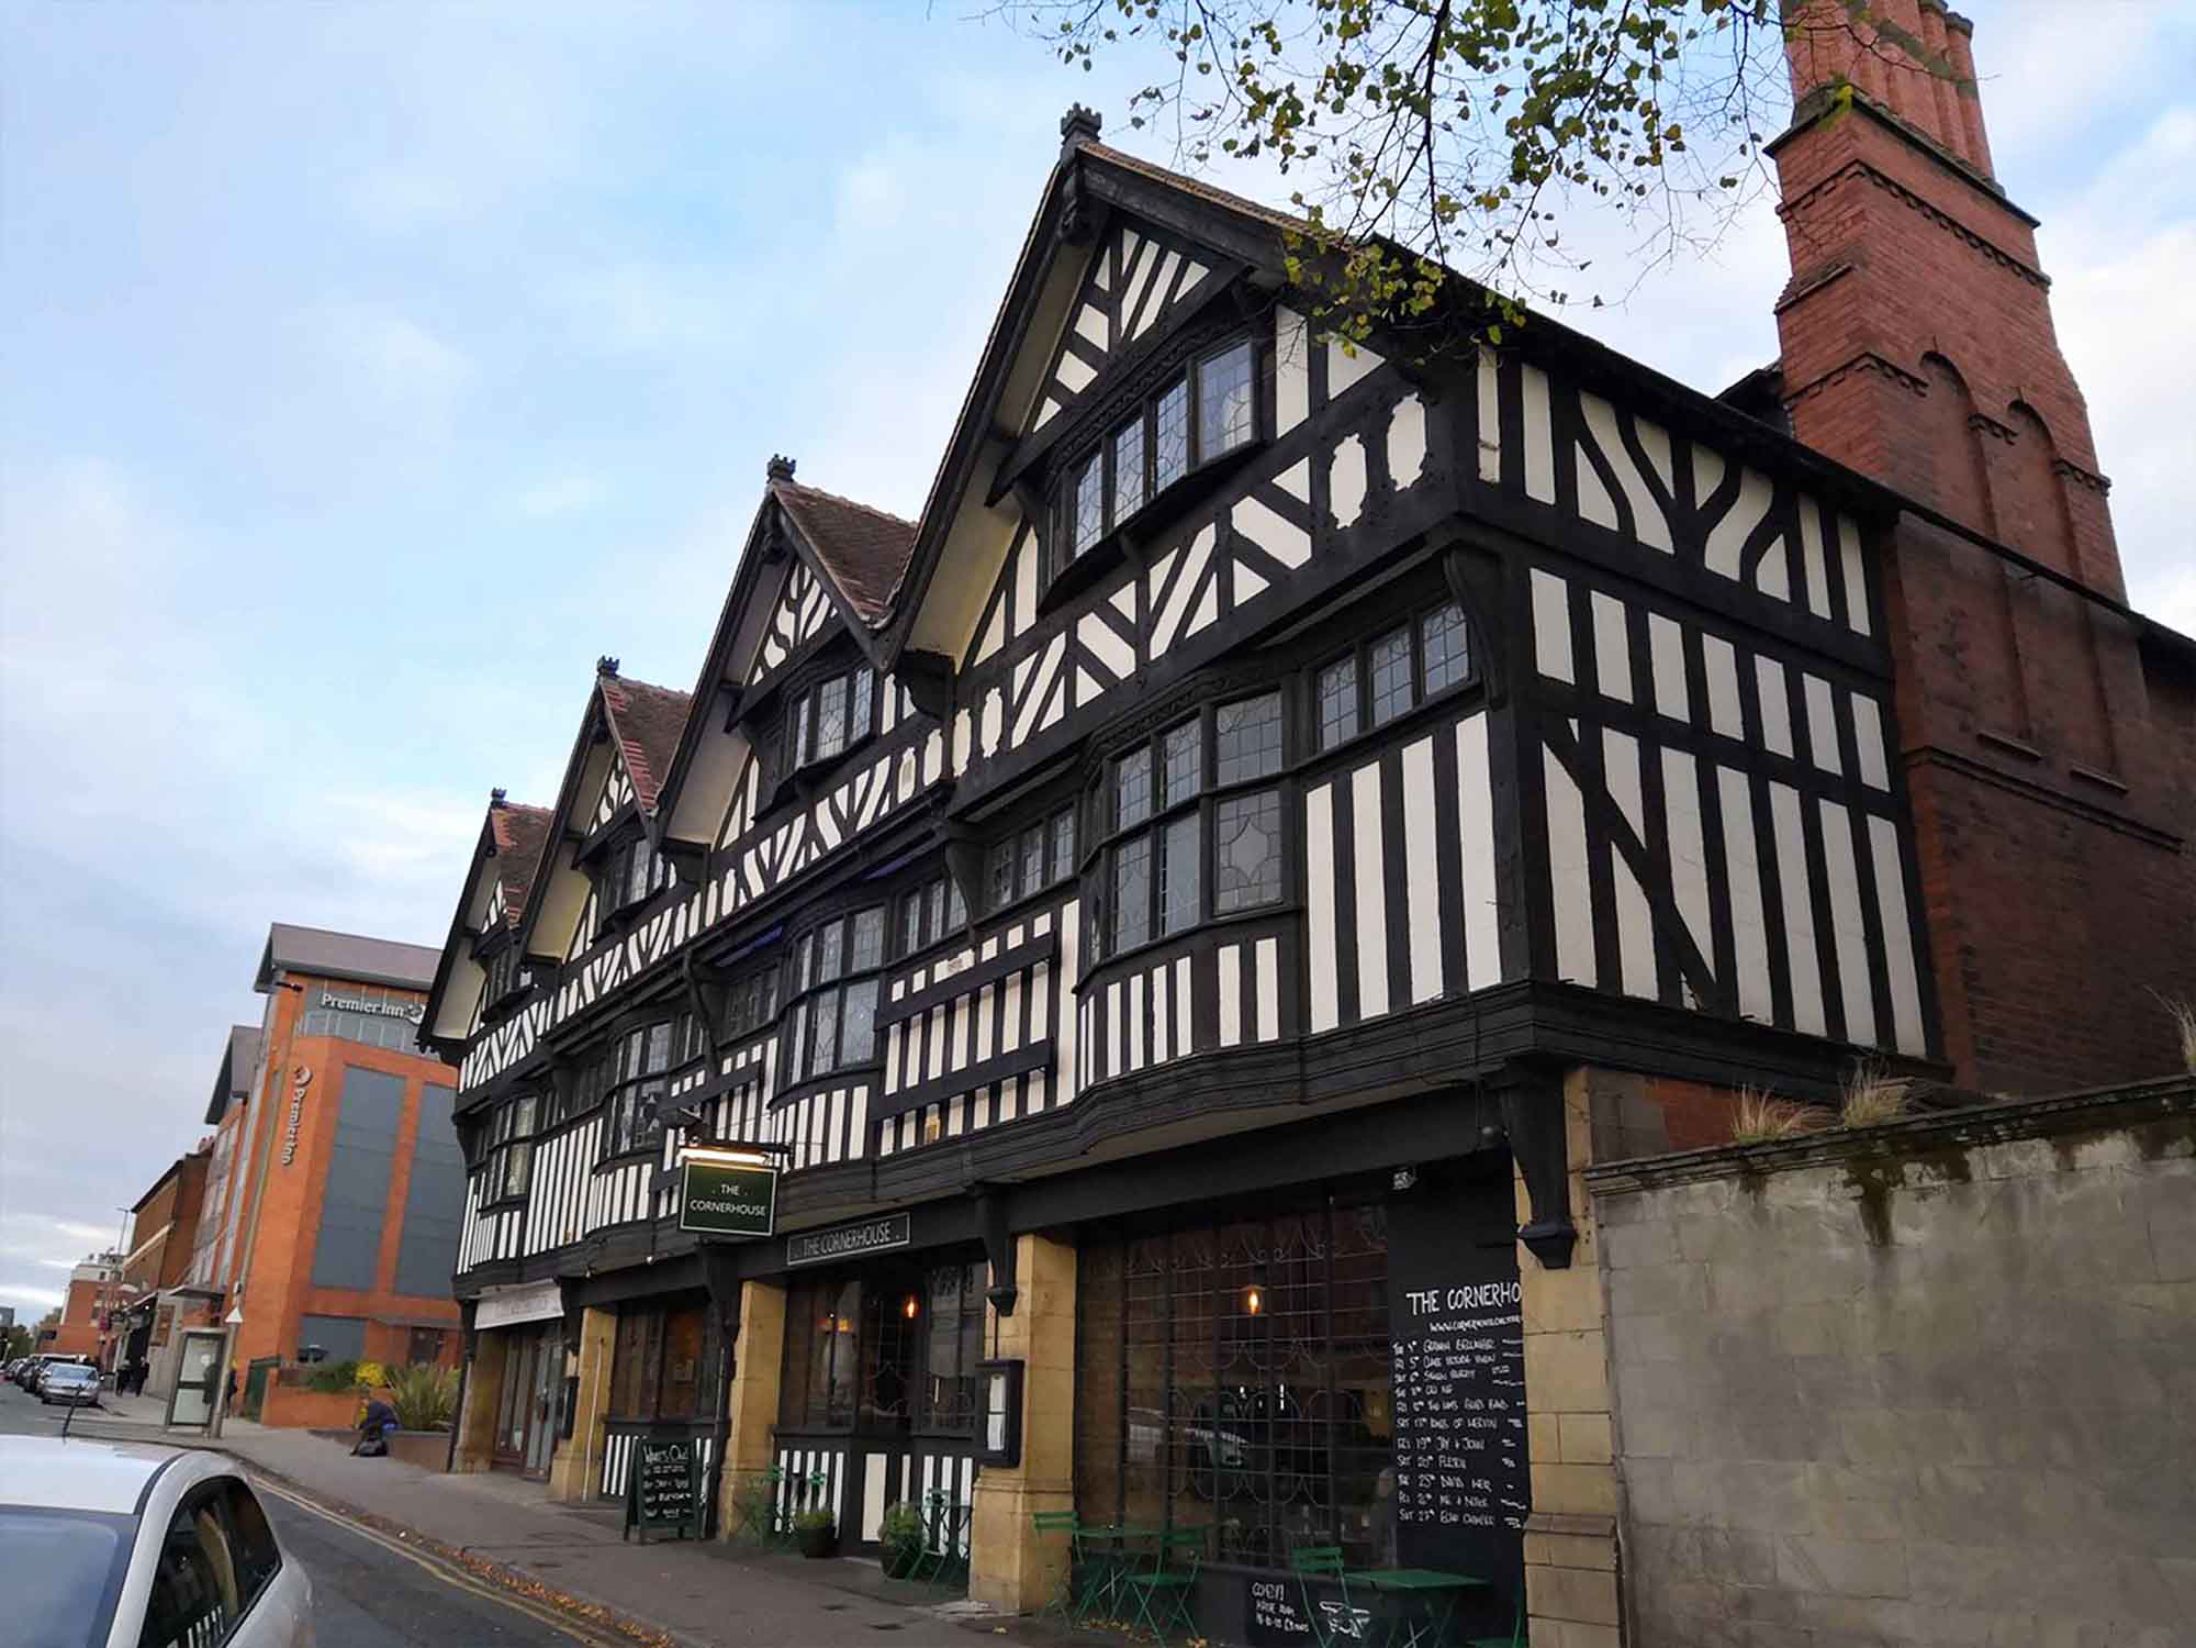 Real Ale Pubs In Chester 13 Pubs With Great Beer